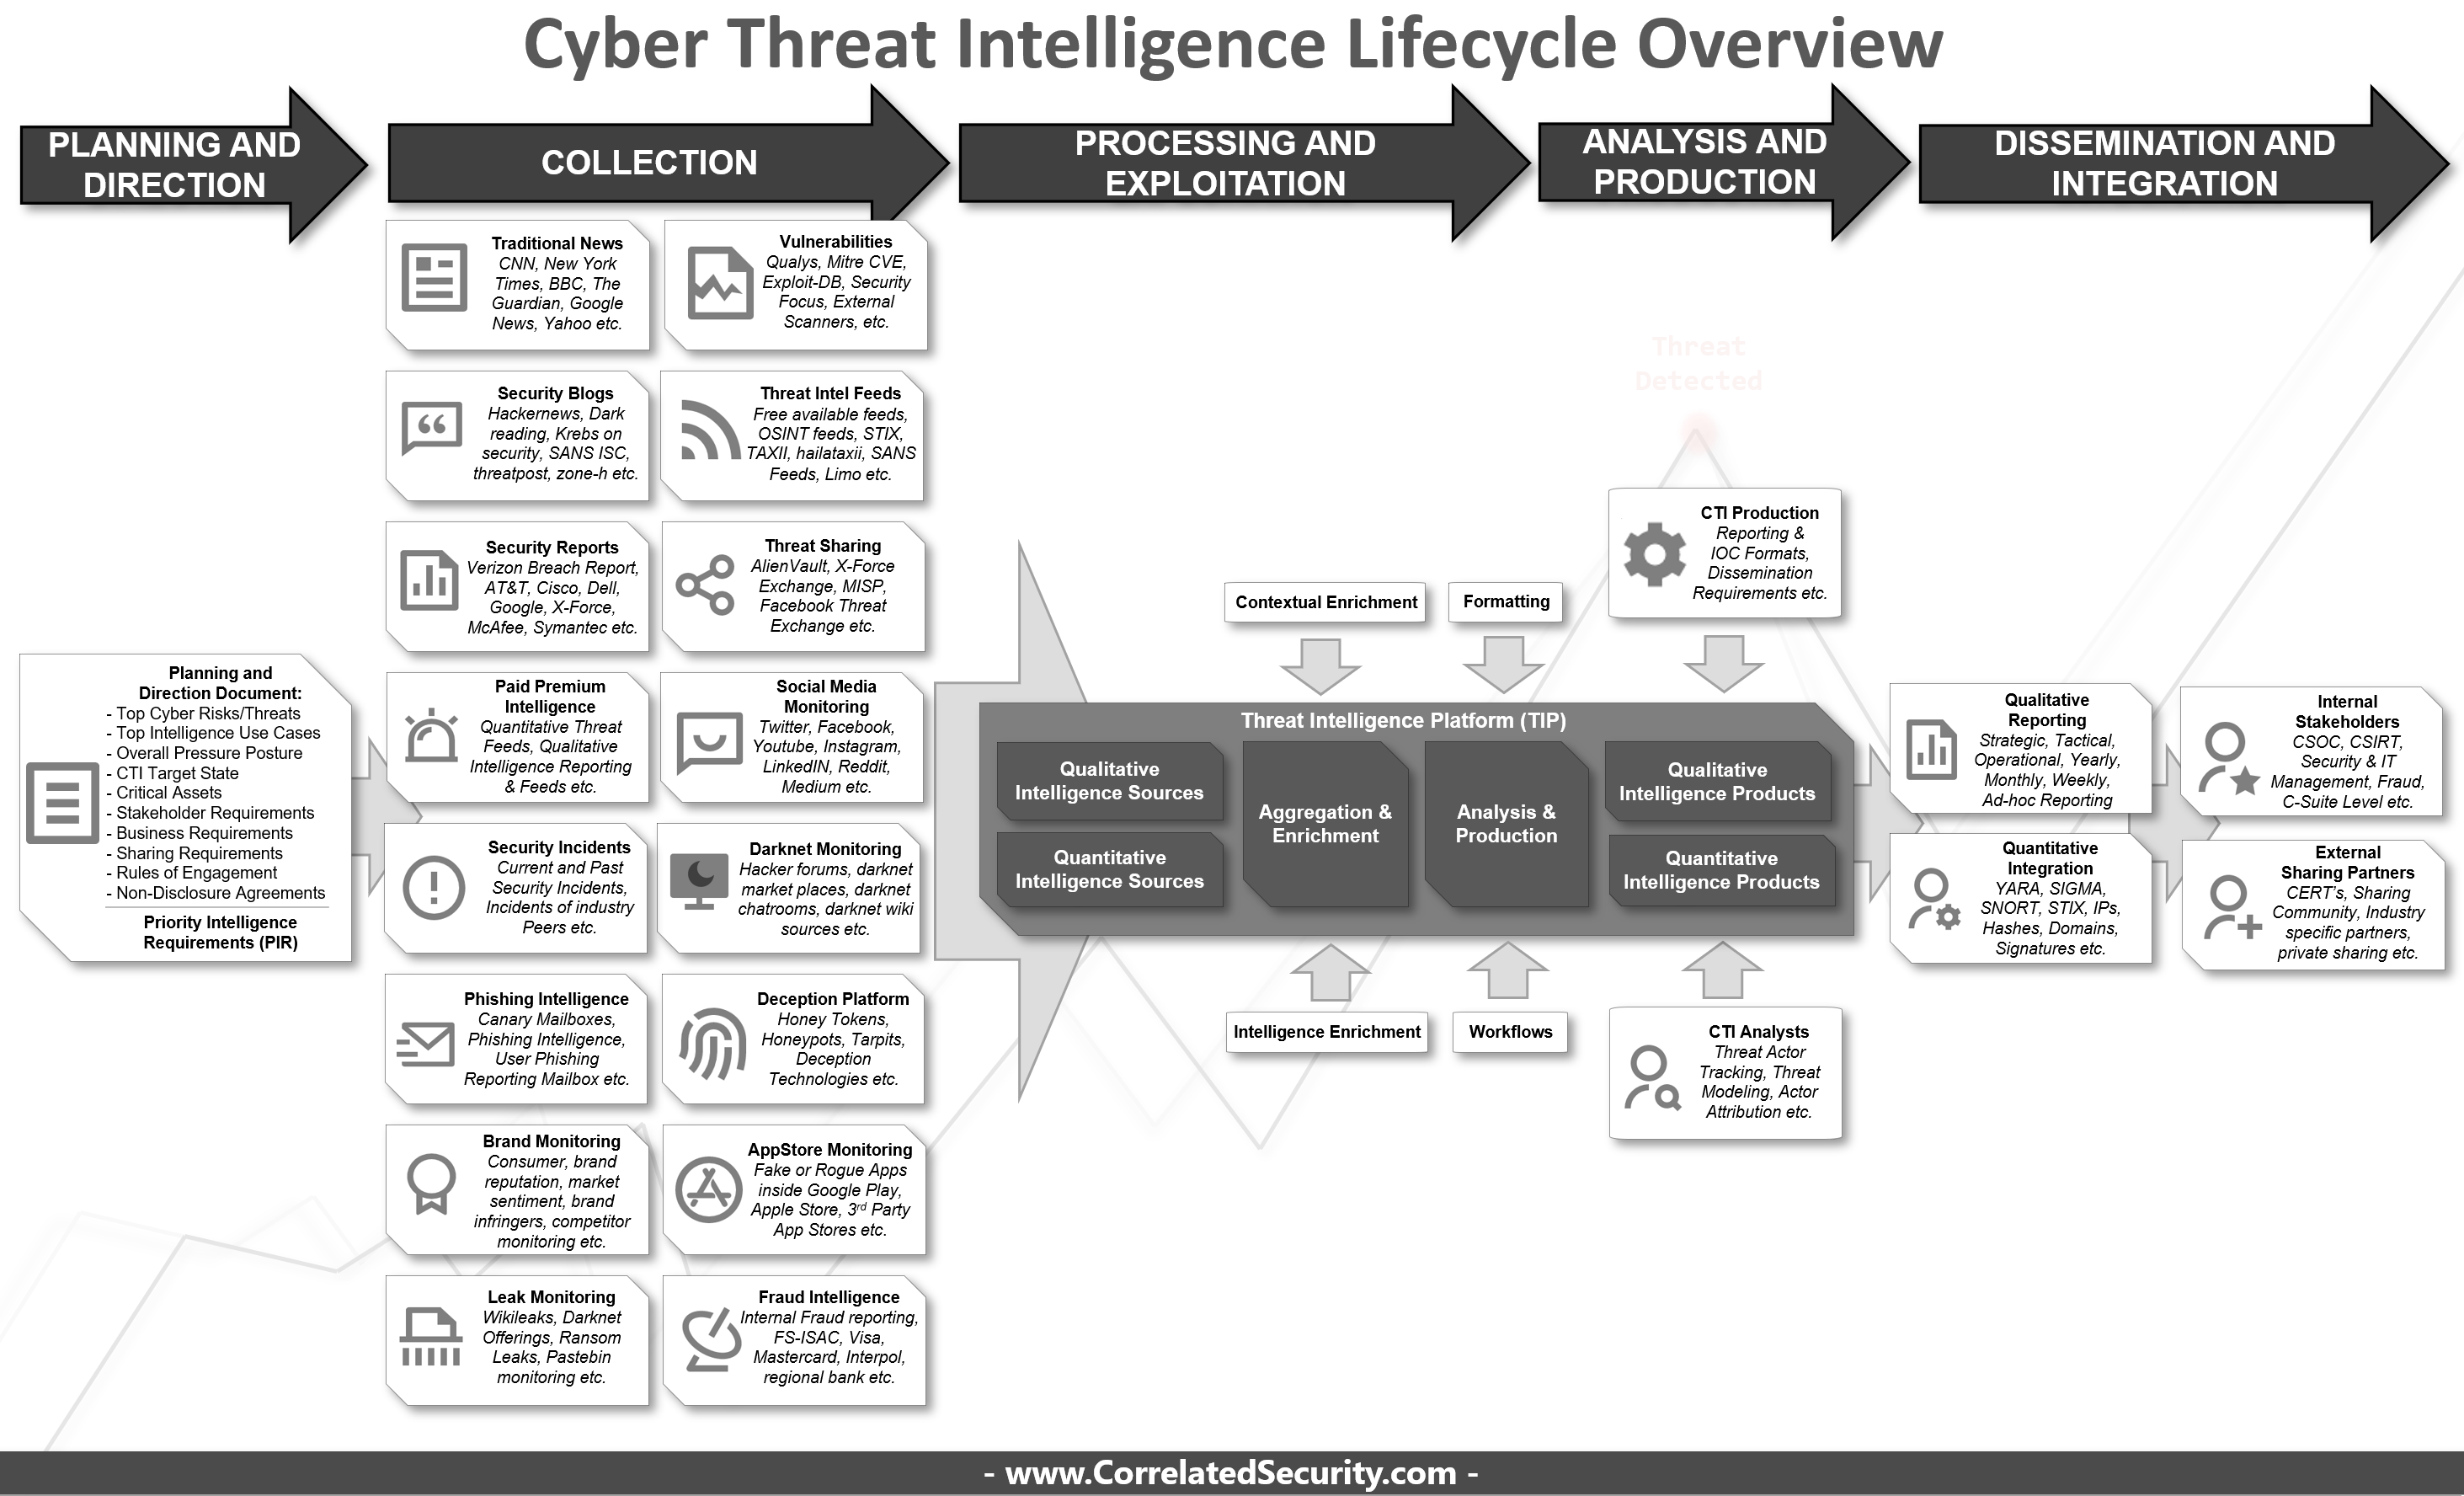 Cyber Threat Intelligence Lifecycle